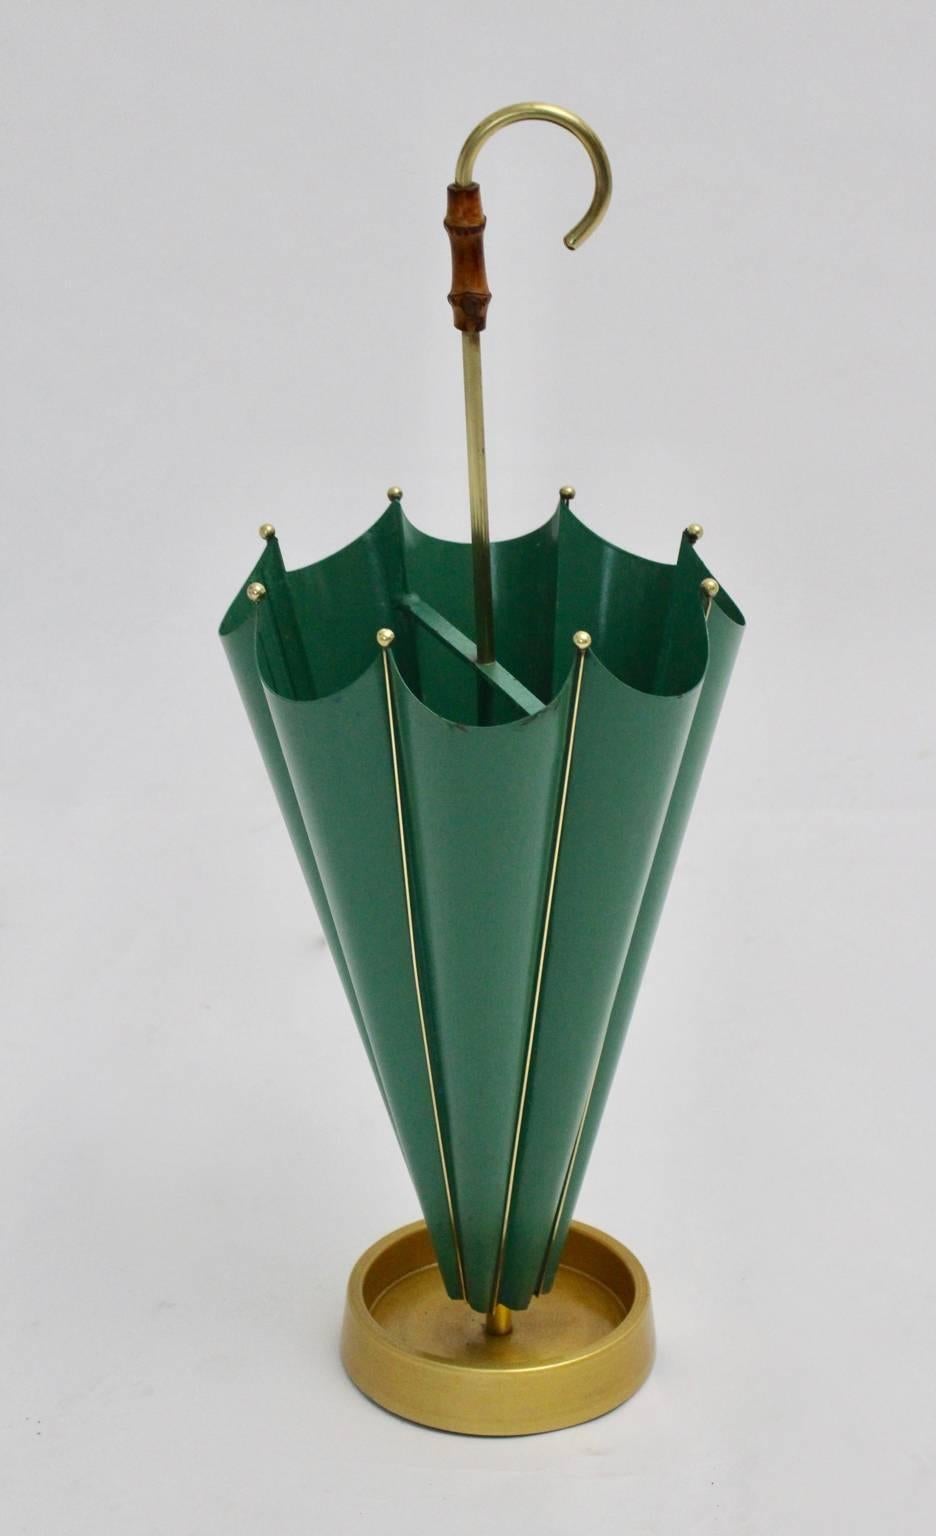 This charming umbrella stand was designed and produced in the 1950s, Italy. It is shaped like an umbrella and colored in green.
Furthermore the umbrella stand was made of cast iron, aluminium, sheet metal, brass and bamboo details.
The vintage